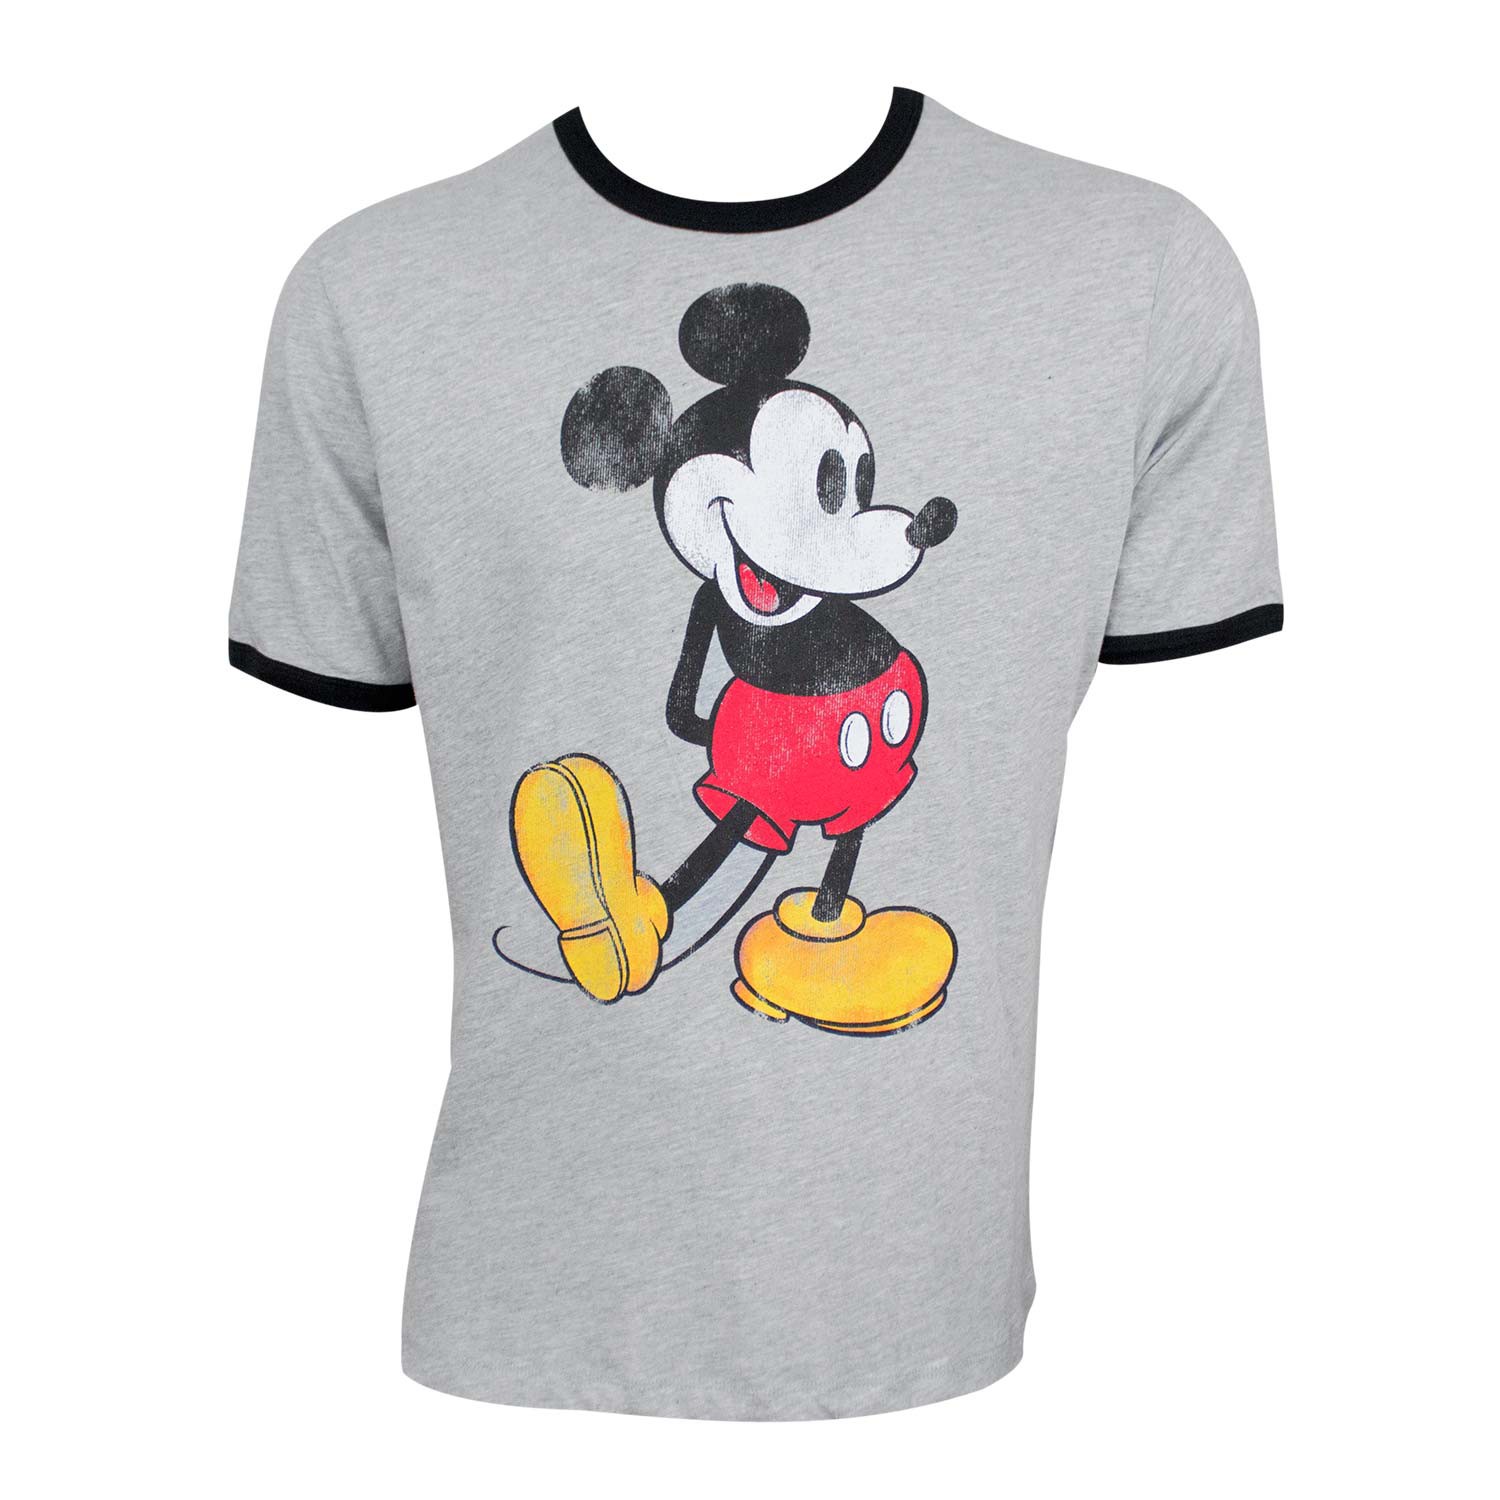 Mickey Mouse Ringer Tee Shirt